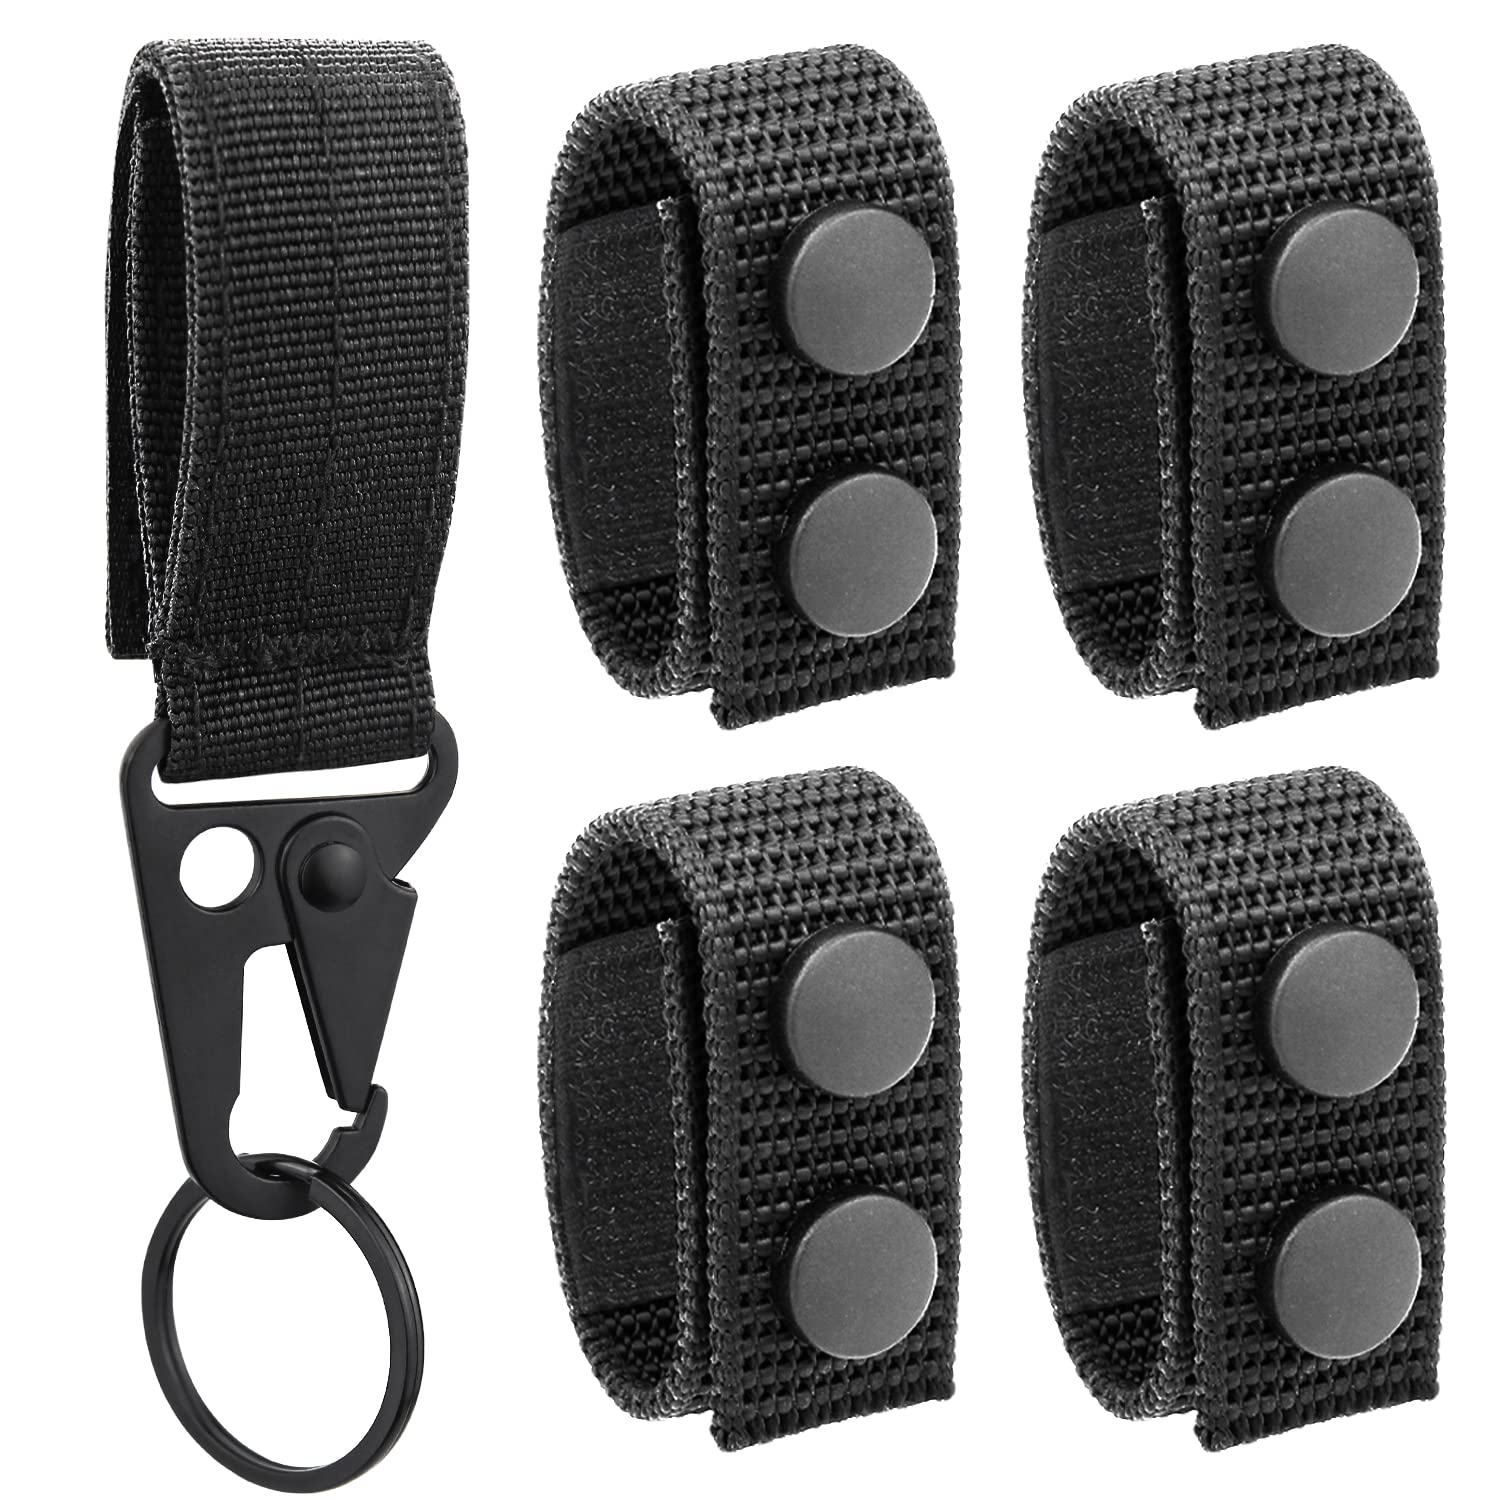 Belt Keepers with Tactical Gear Clip, Law Enforcement Nylon Duty Belt  Keepers 2 with Key Holder UIInosoo for Police Black 5 Pcs